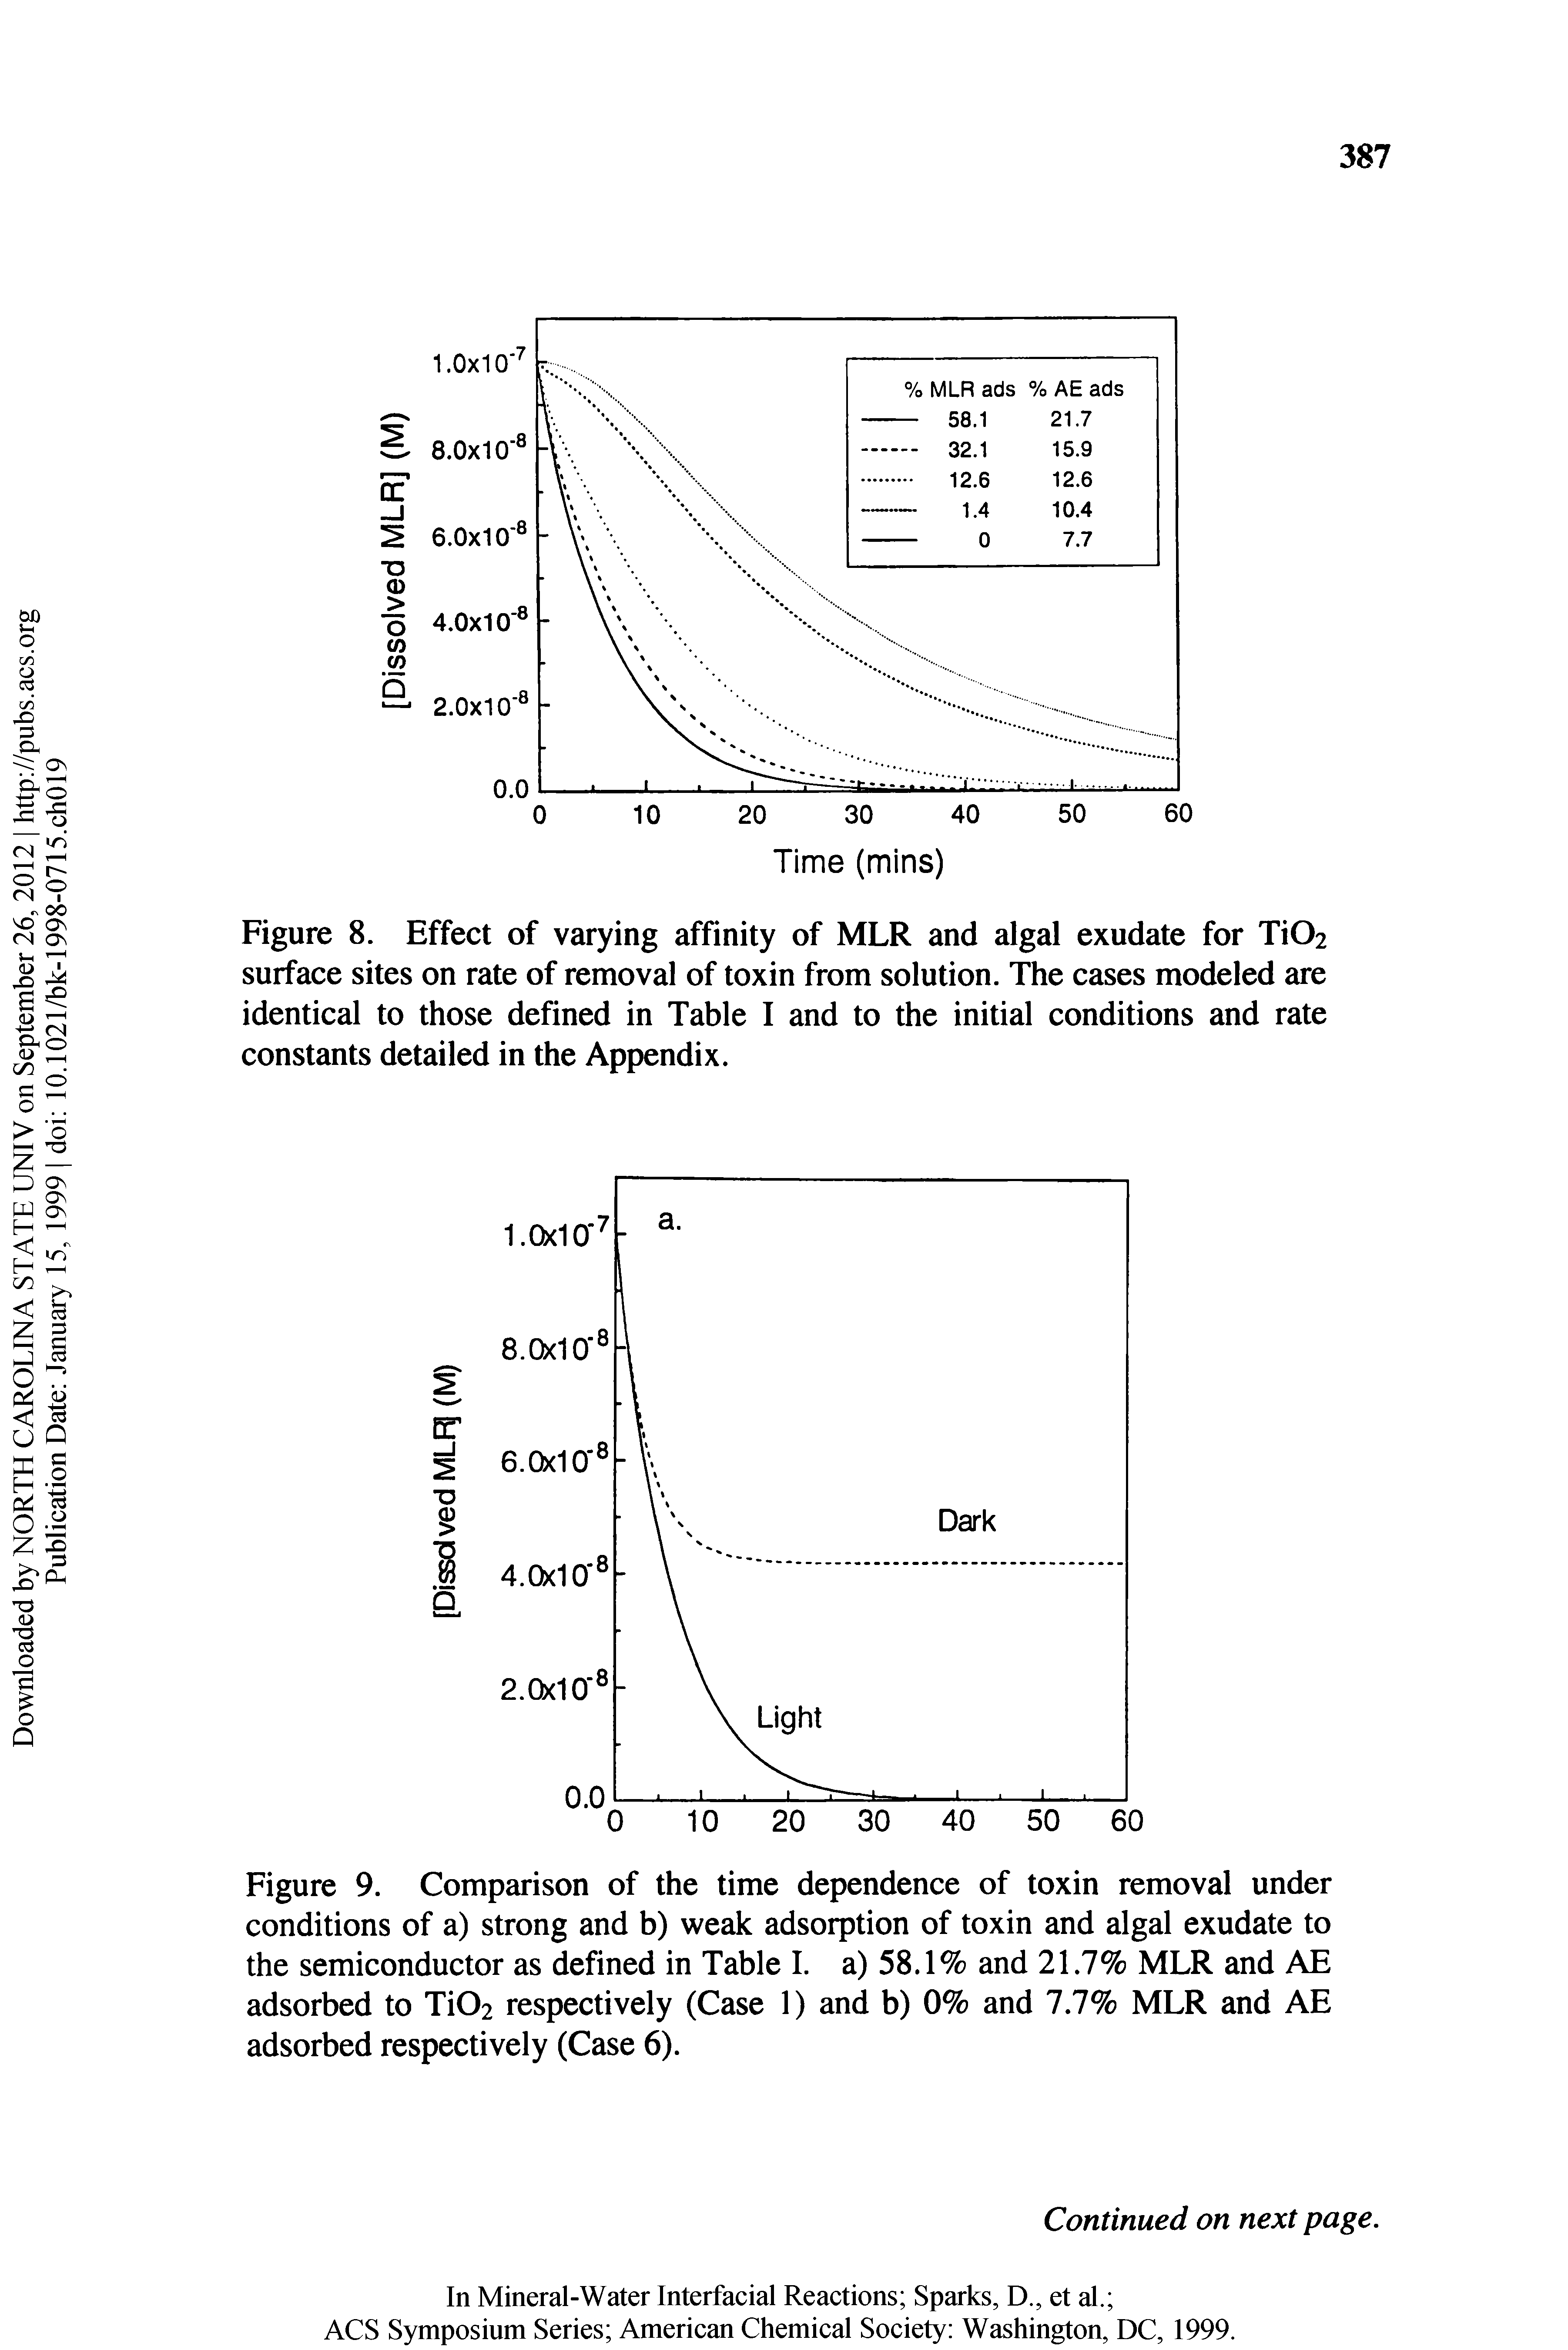 Figure 9. Comparison of the time dependence of toxin removal under conditions of a) strong and b) weak adsorption of toxin and algal exudate to the semiconductor as defined in Table I. a) 58.1% and 21.7% MLR and AE adsorbed to Ti02 respectively (Case 1) and b) 0% and 7.7% MLR and AE adsorbed respectively (Case 6).